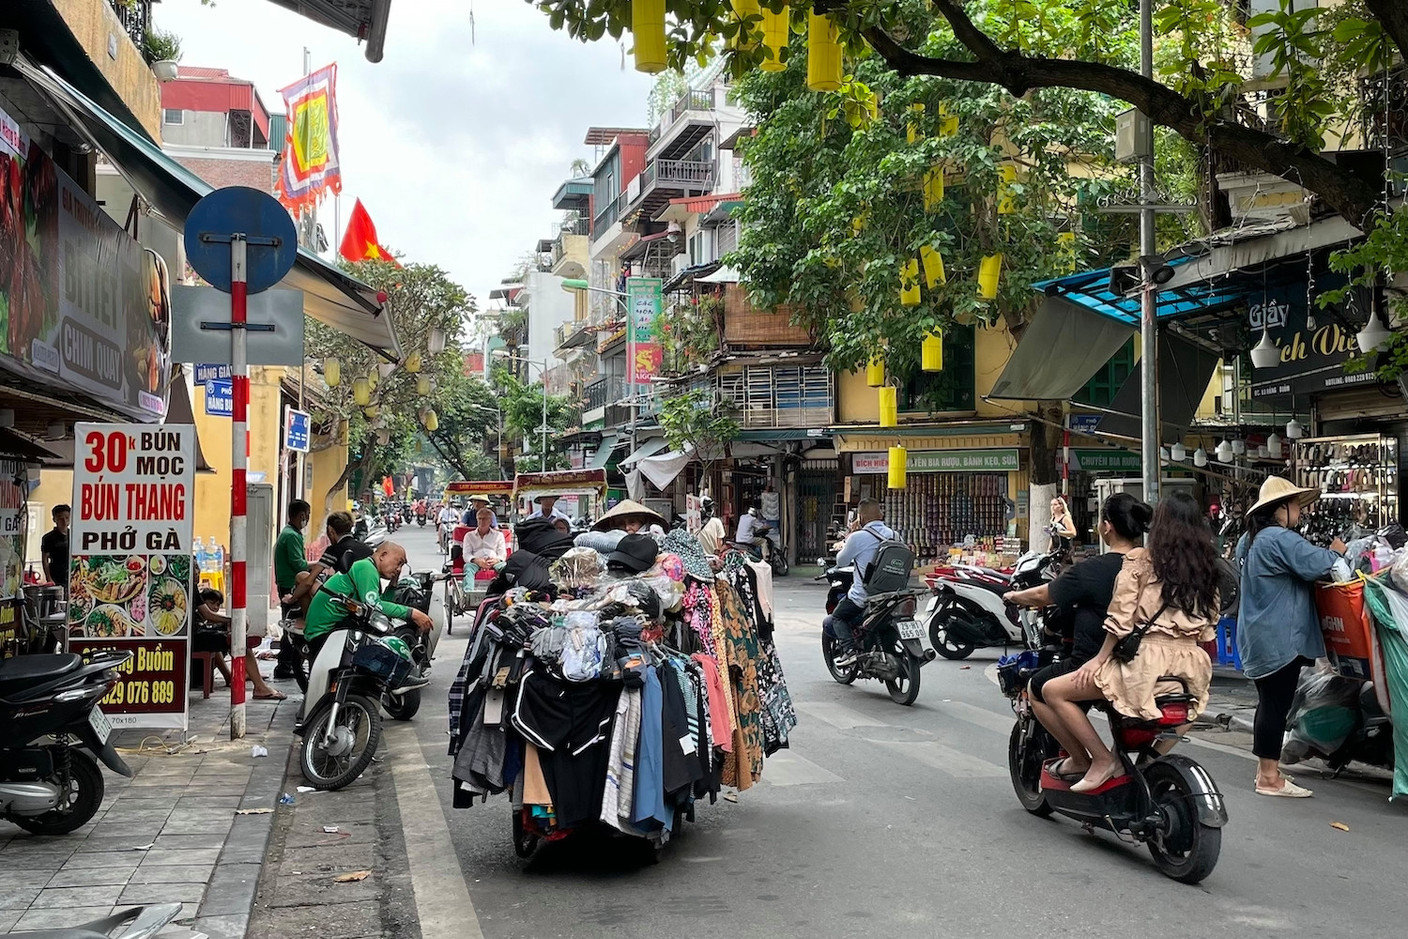 Hanoi’s old quarter in Vietnam, a busy maze of streets, hawkers and scooters. Photos: Cordula Schnuer